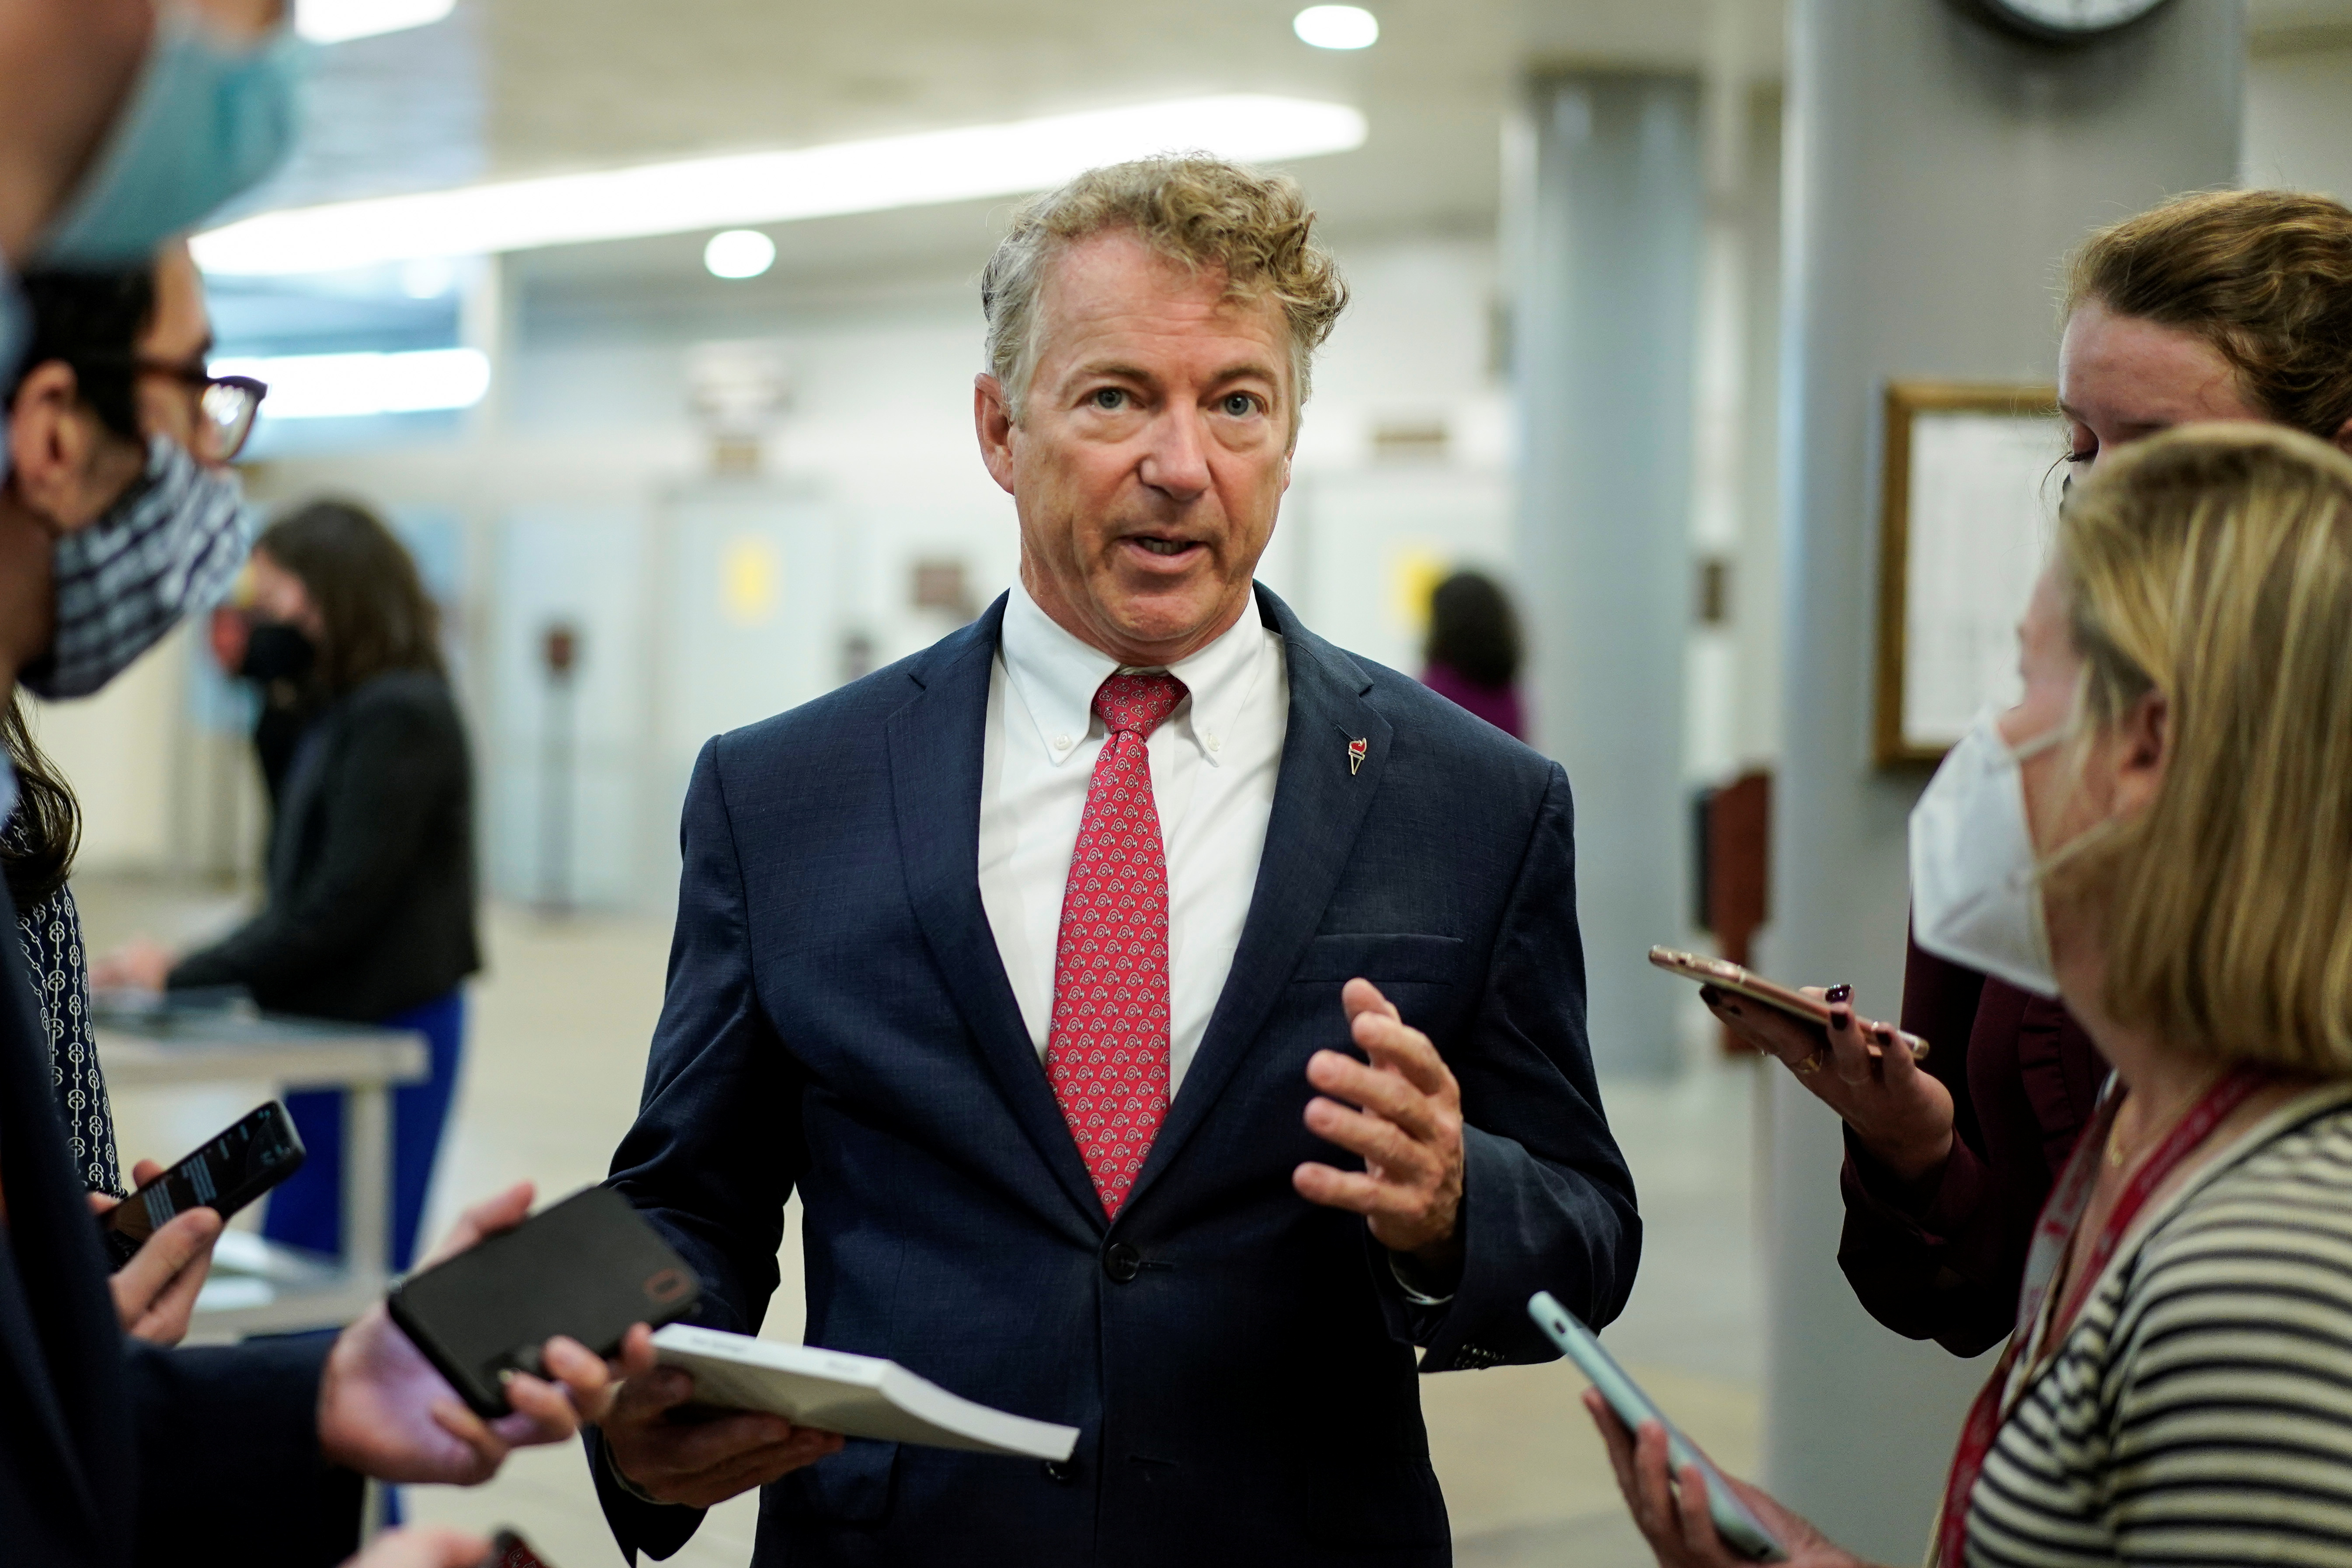 Senator Rand Paul (R-KY) arrives for a vote on Capitol Hill in Washington